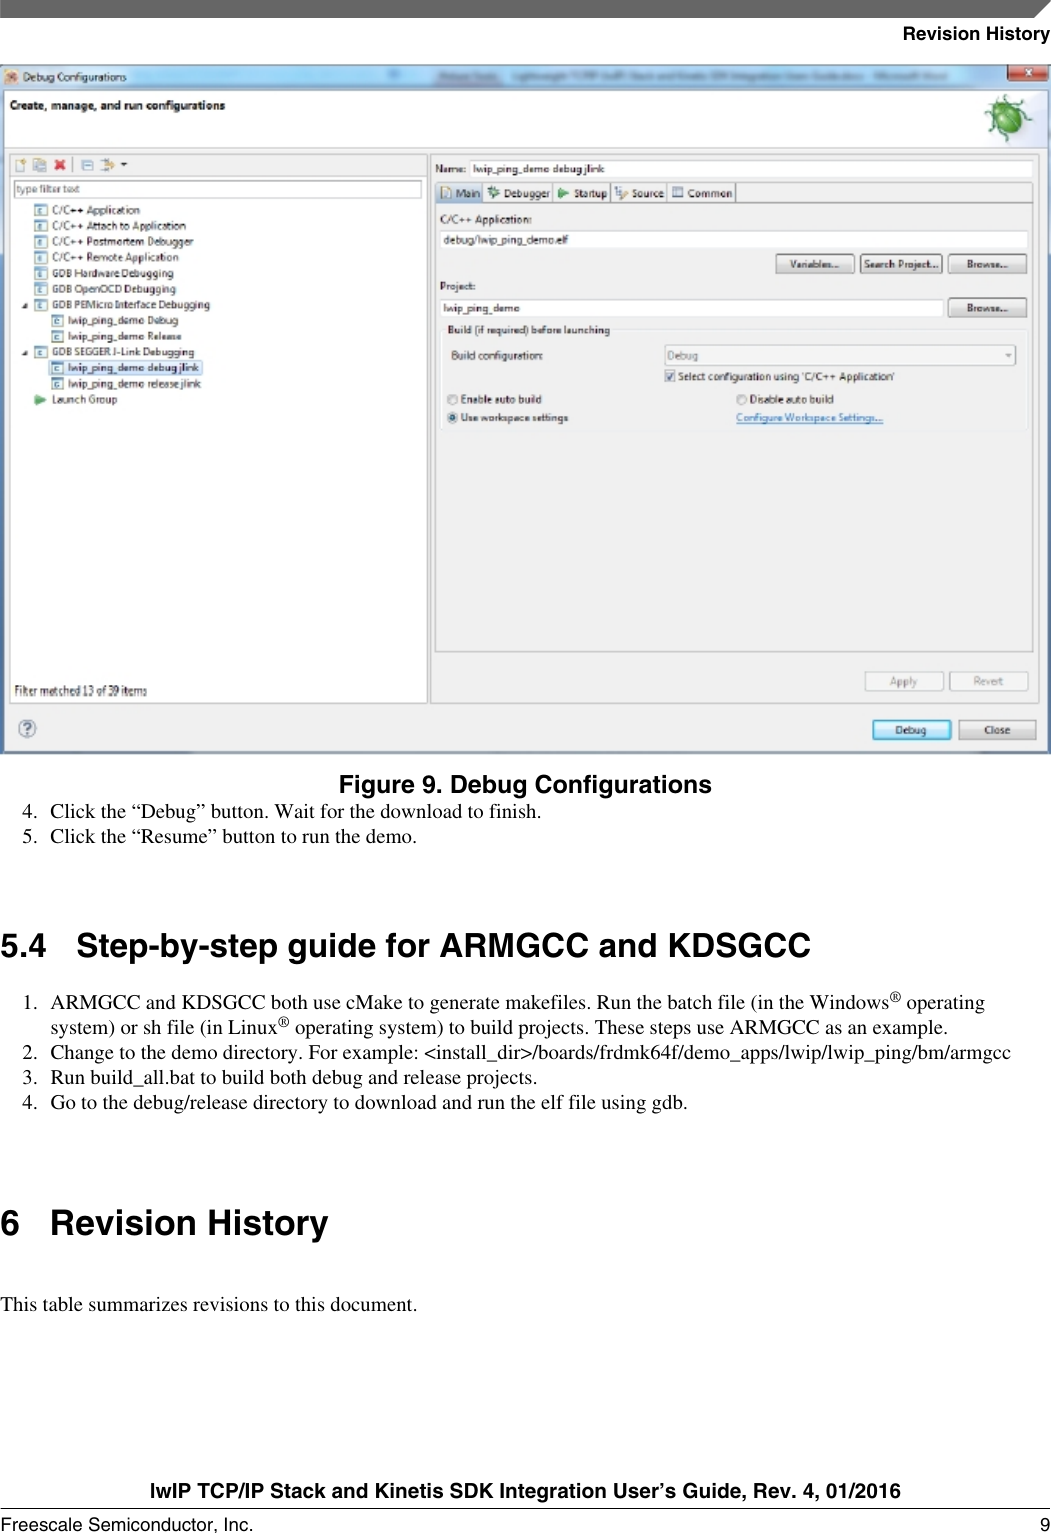 Page 9 of 11 - LwIP TCP/IP Stack And Kinetis SDK Integration User’s Guide Lw IP TCPIP User's